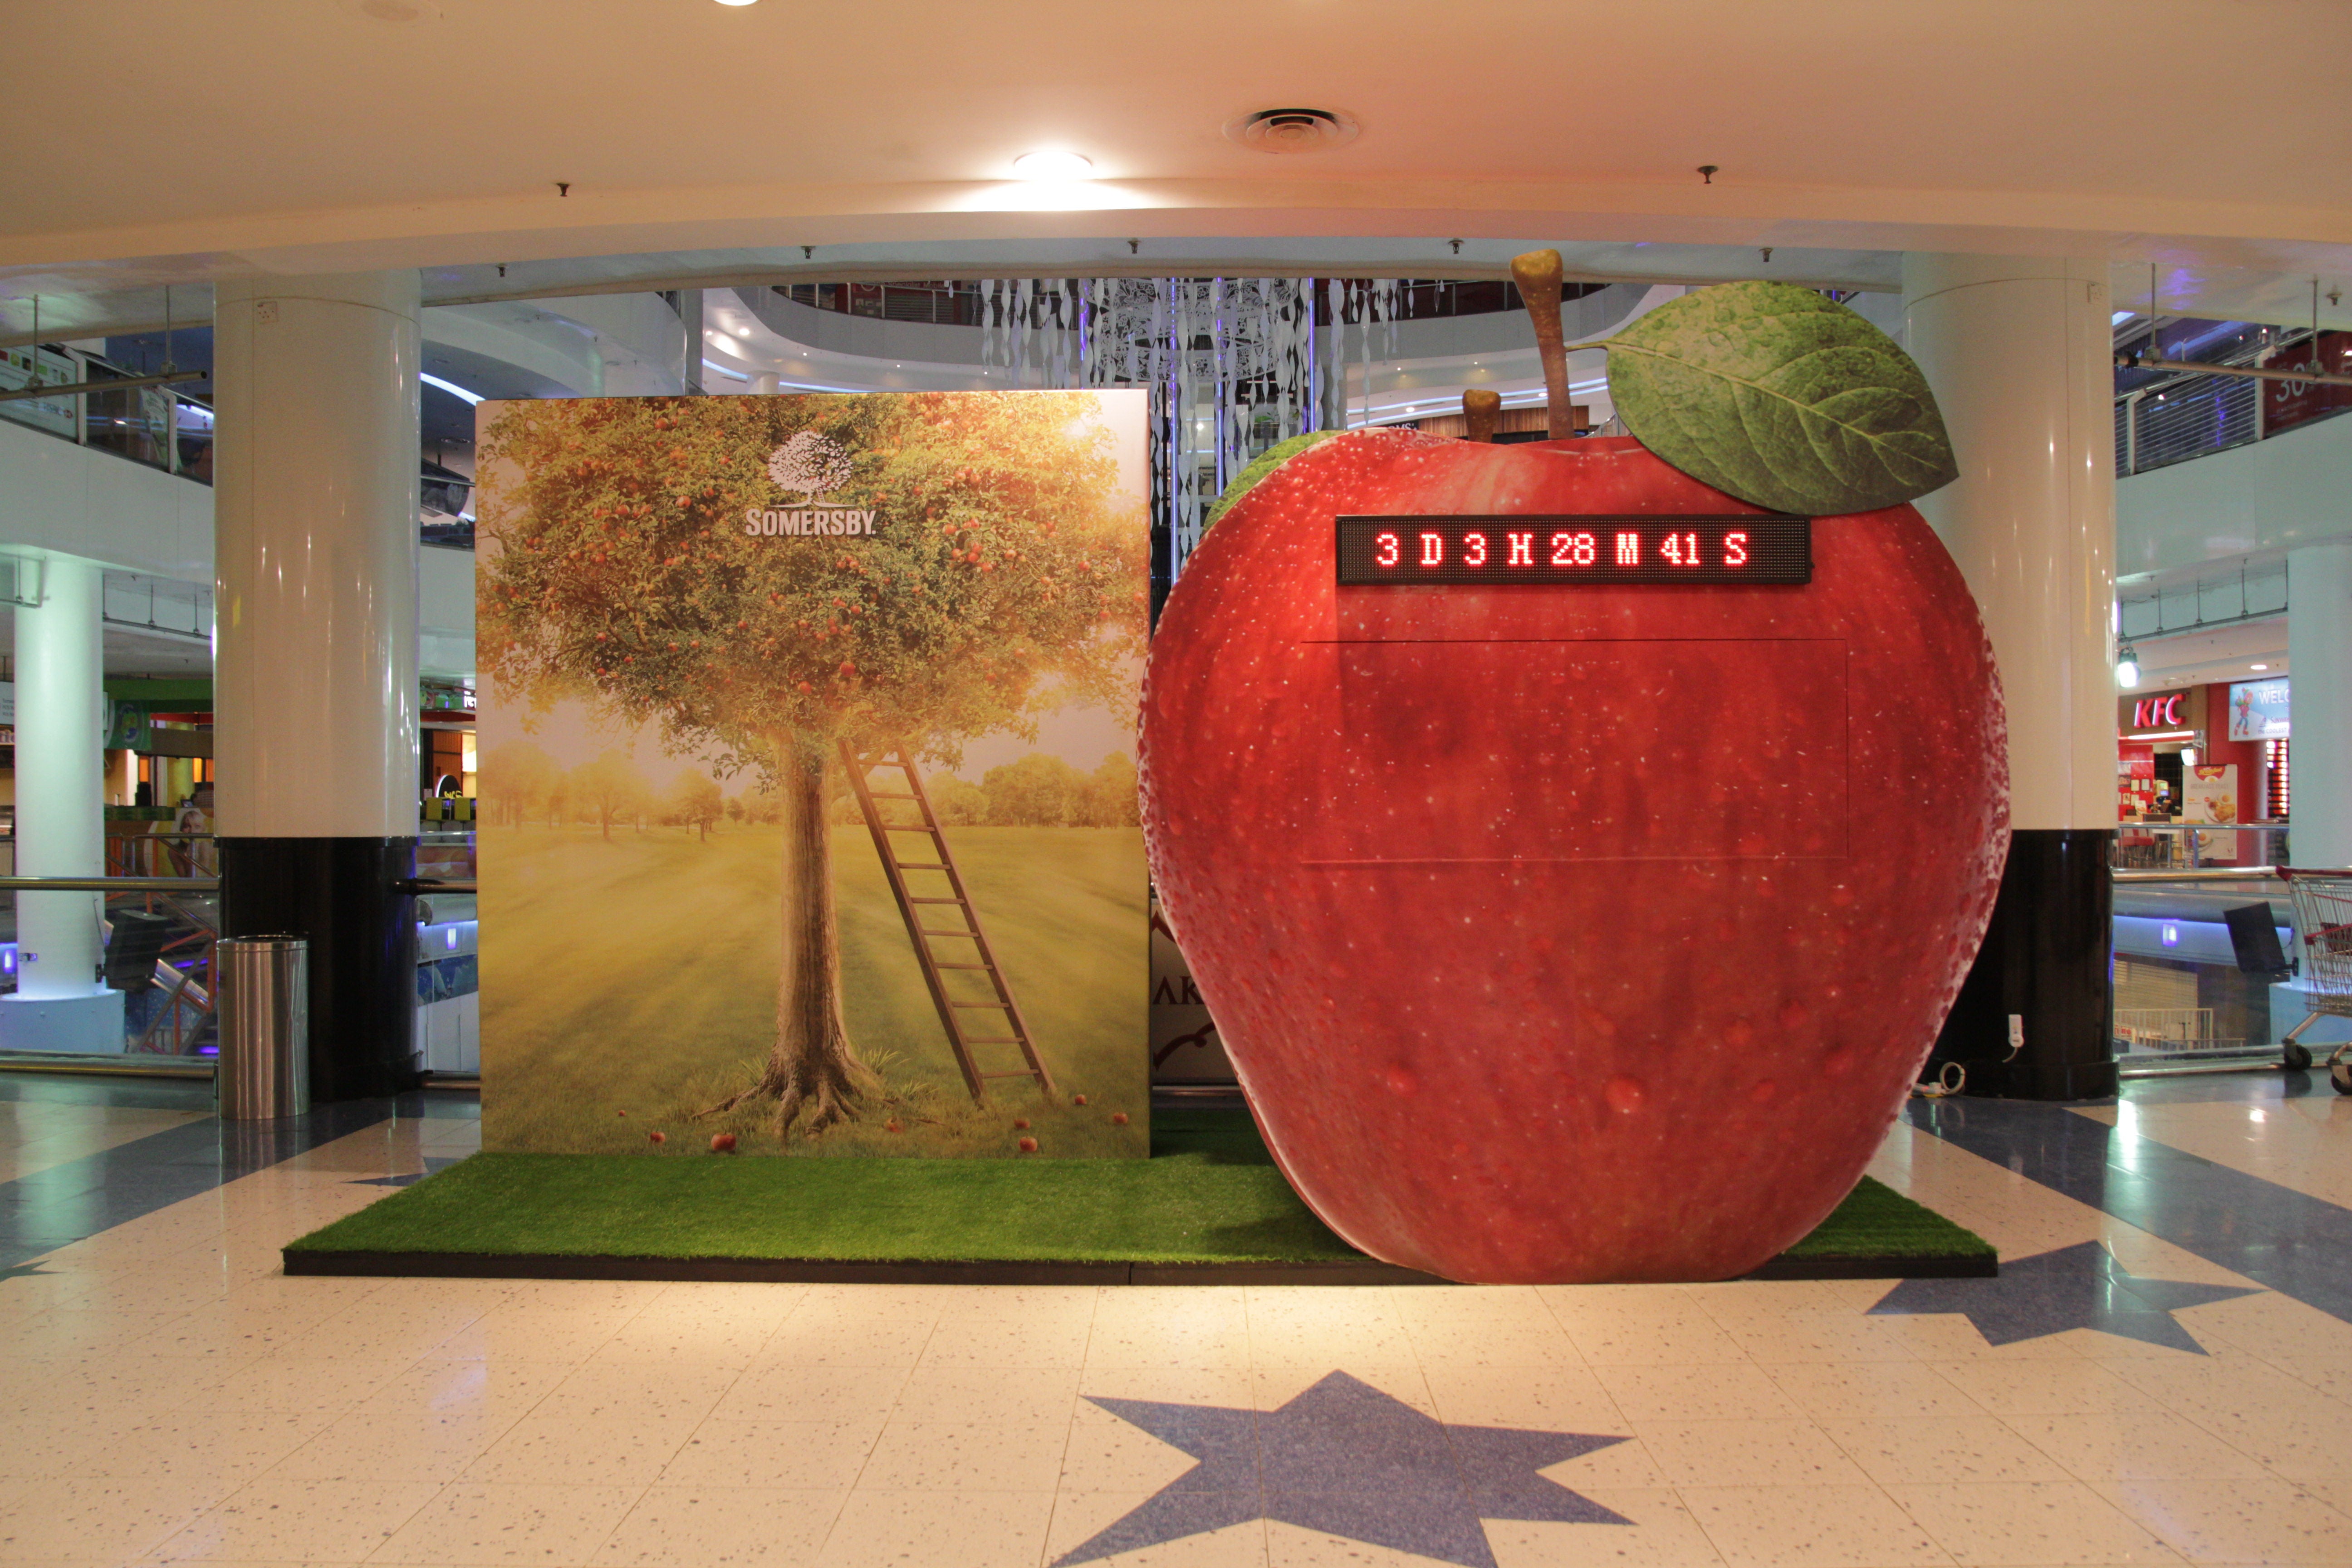 [TEST] Gigantic Apples with Countdown Timers are Popping up Around KL and PJ, But Why?! - World Of Buzz 1